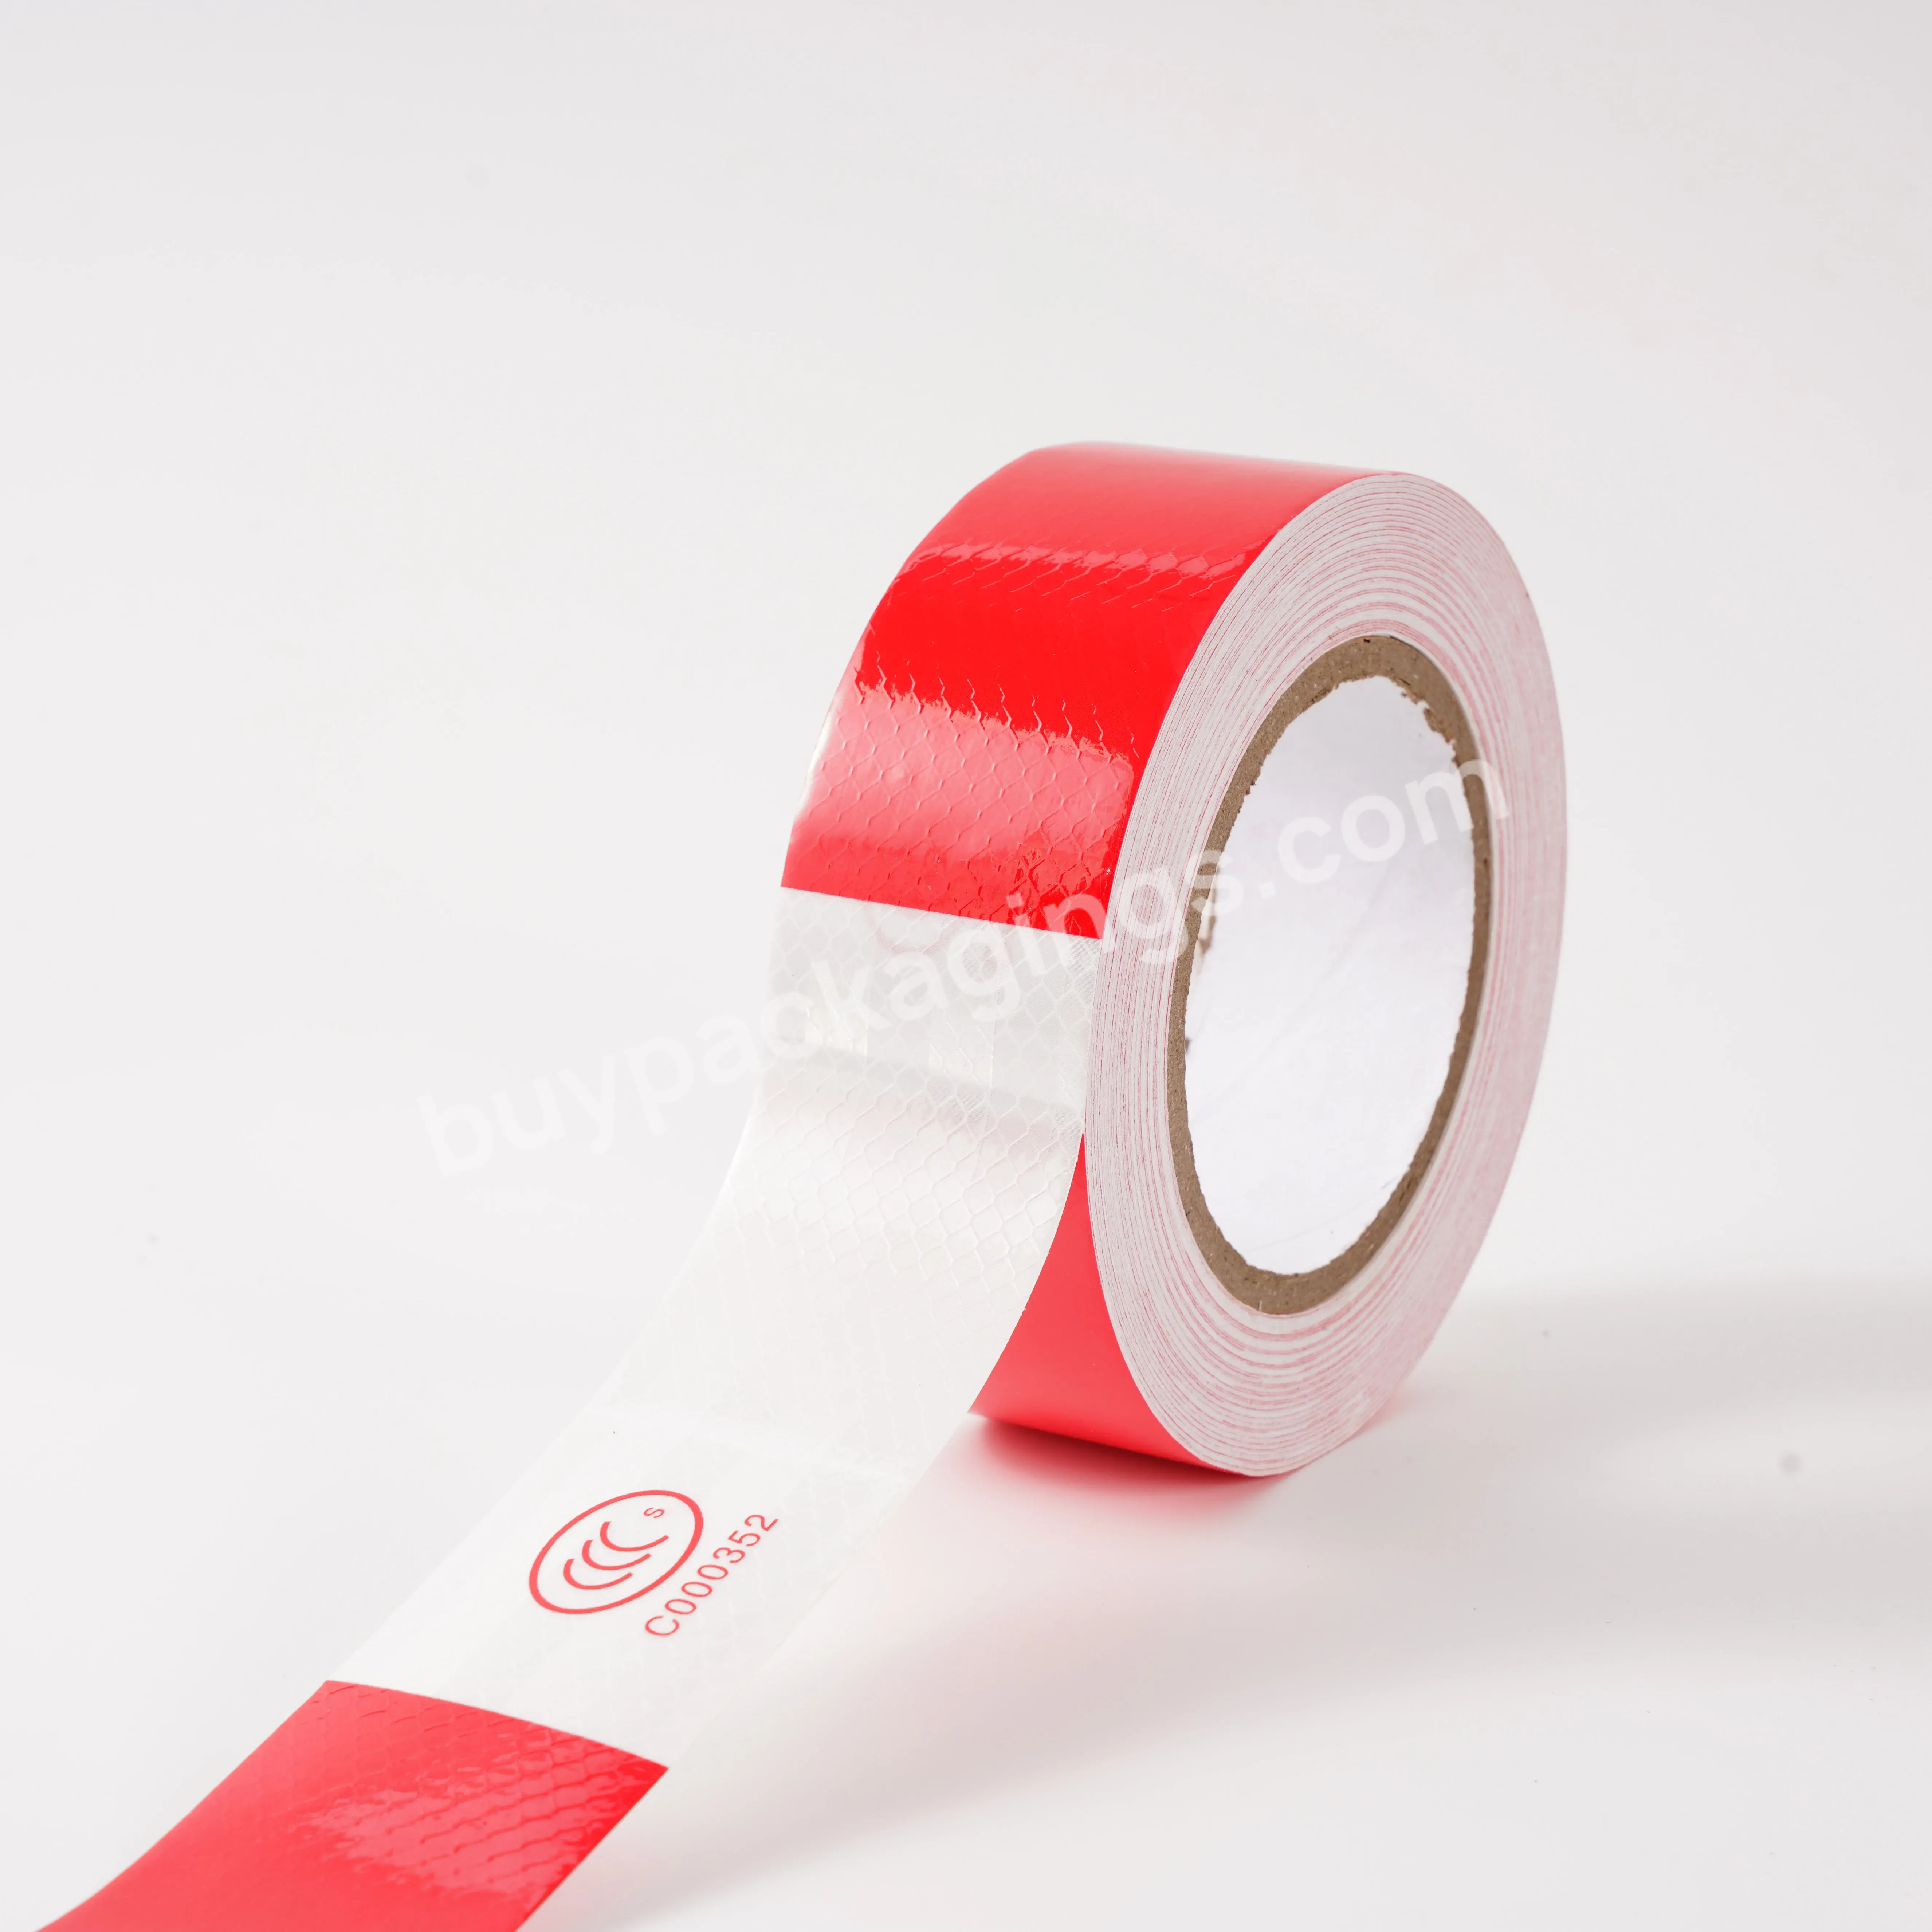 Red And White Reflective Warning Reflective Material Tape For Vehicle Driving